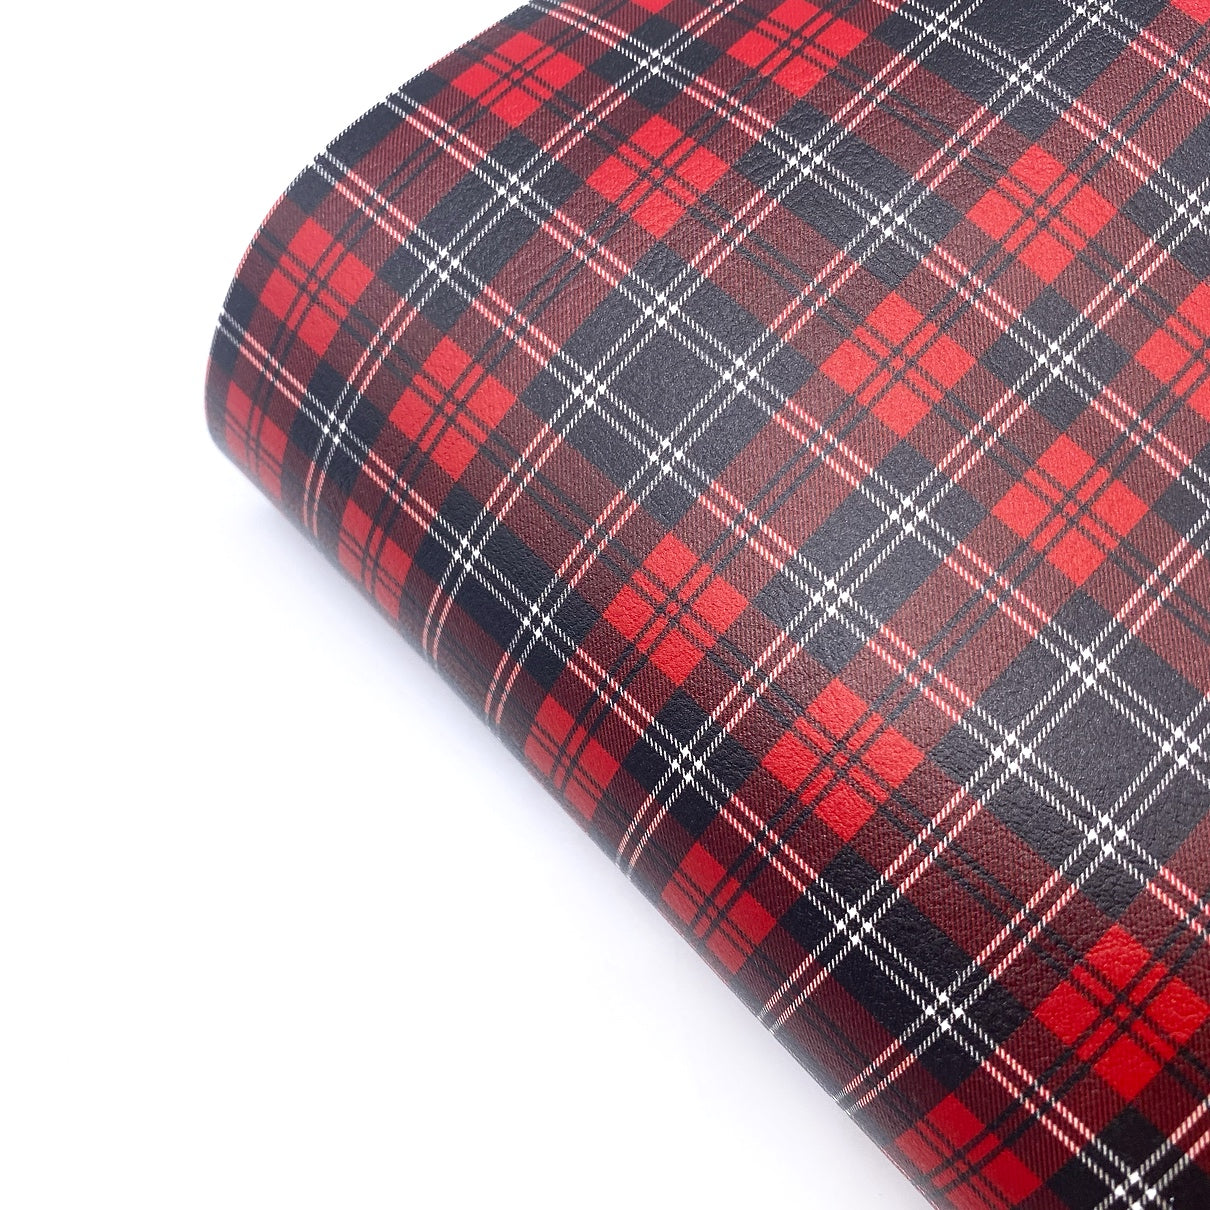 Classic Red & Black Tartan Premium Faux Leather Fabric Sheets